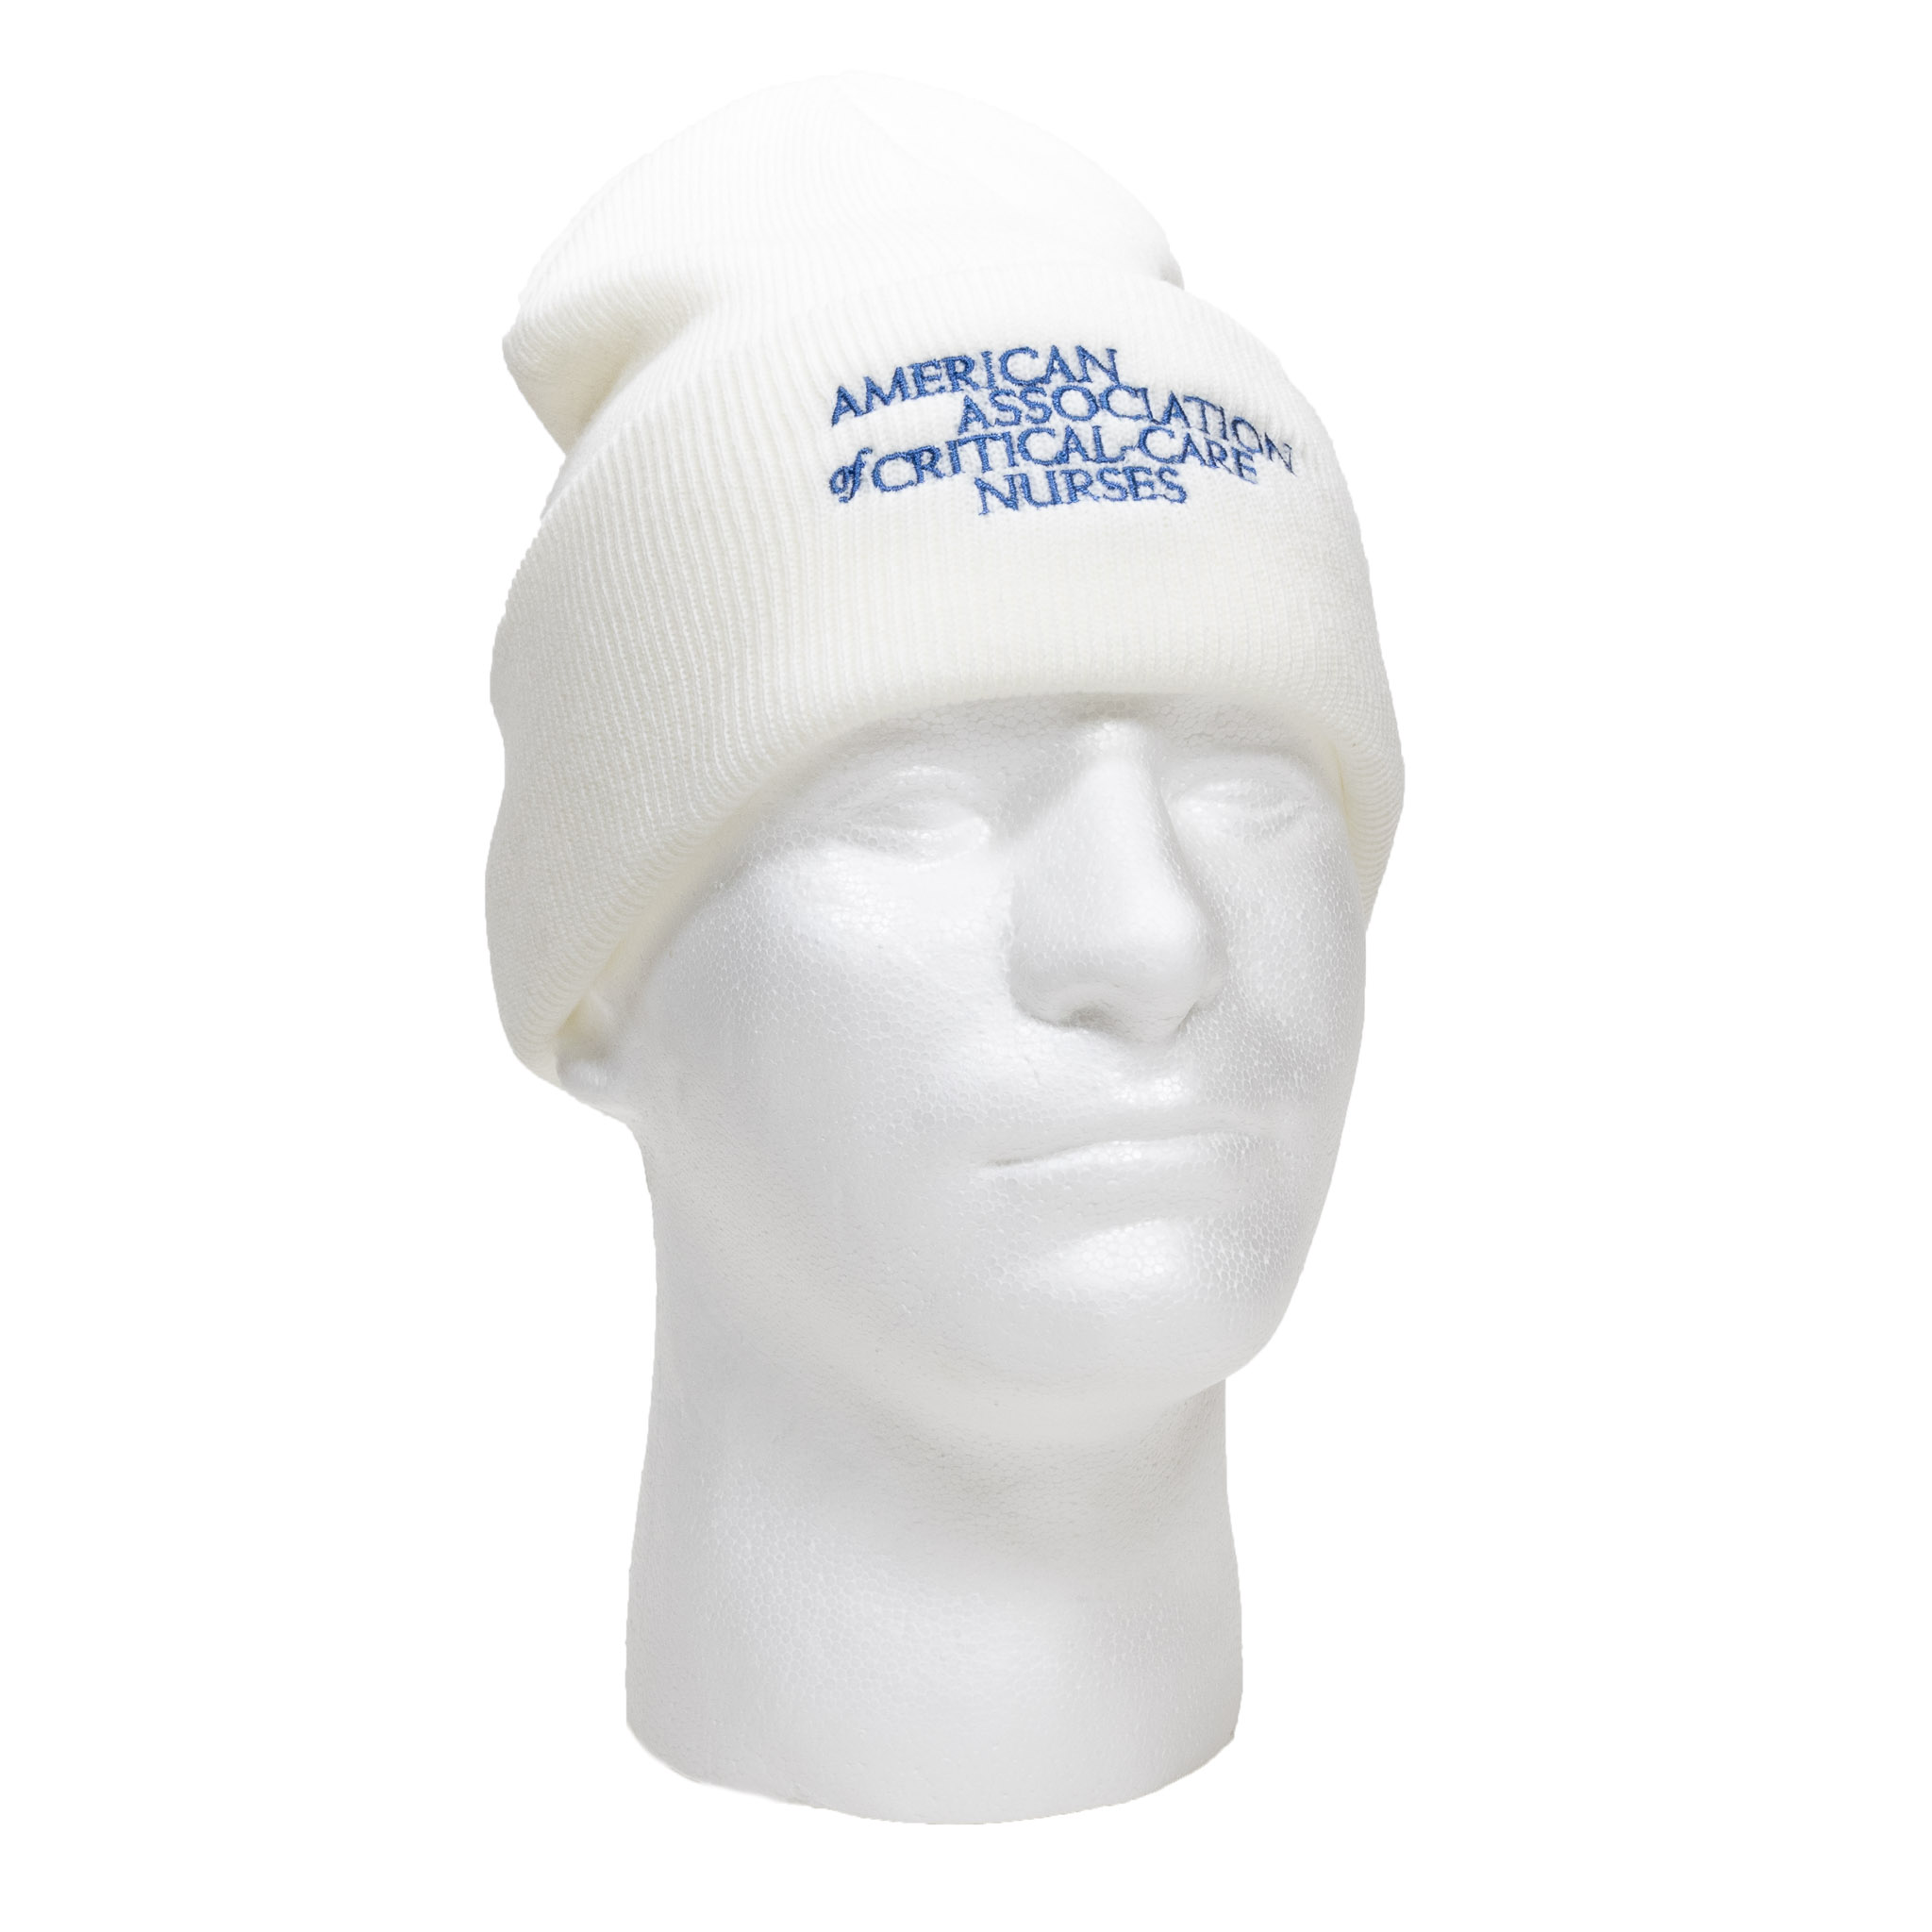 AACN Knit Cap in White